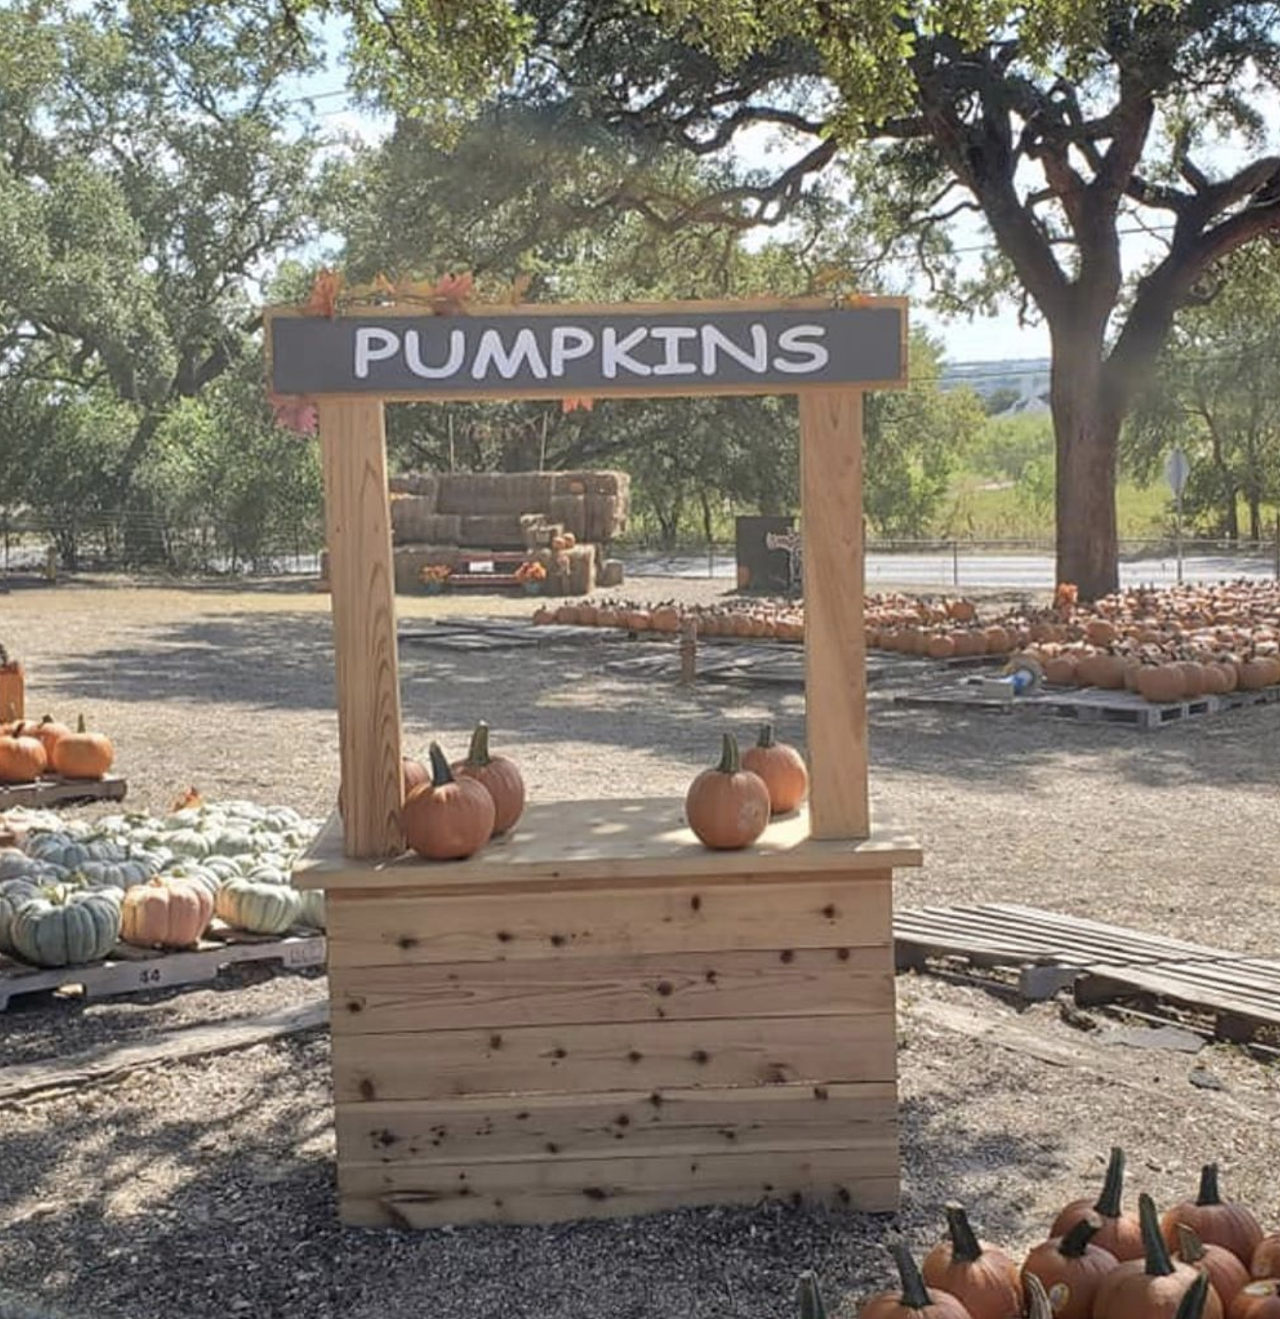 Bracken UMC Pumpkin Patch
20377 FM 2252, (830) 606-6717, facebook.com/BrackenUMCPumpkinPatch
Bracken UMC's pumpkin patch is open daily throughout October. In addition to pumpkins, the church is selling a cheeky 2020 t-shirt featuring an illustration of two pumpkins wearing face masks.
Photo via Instagram / brackenumc